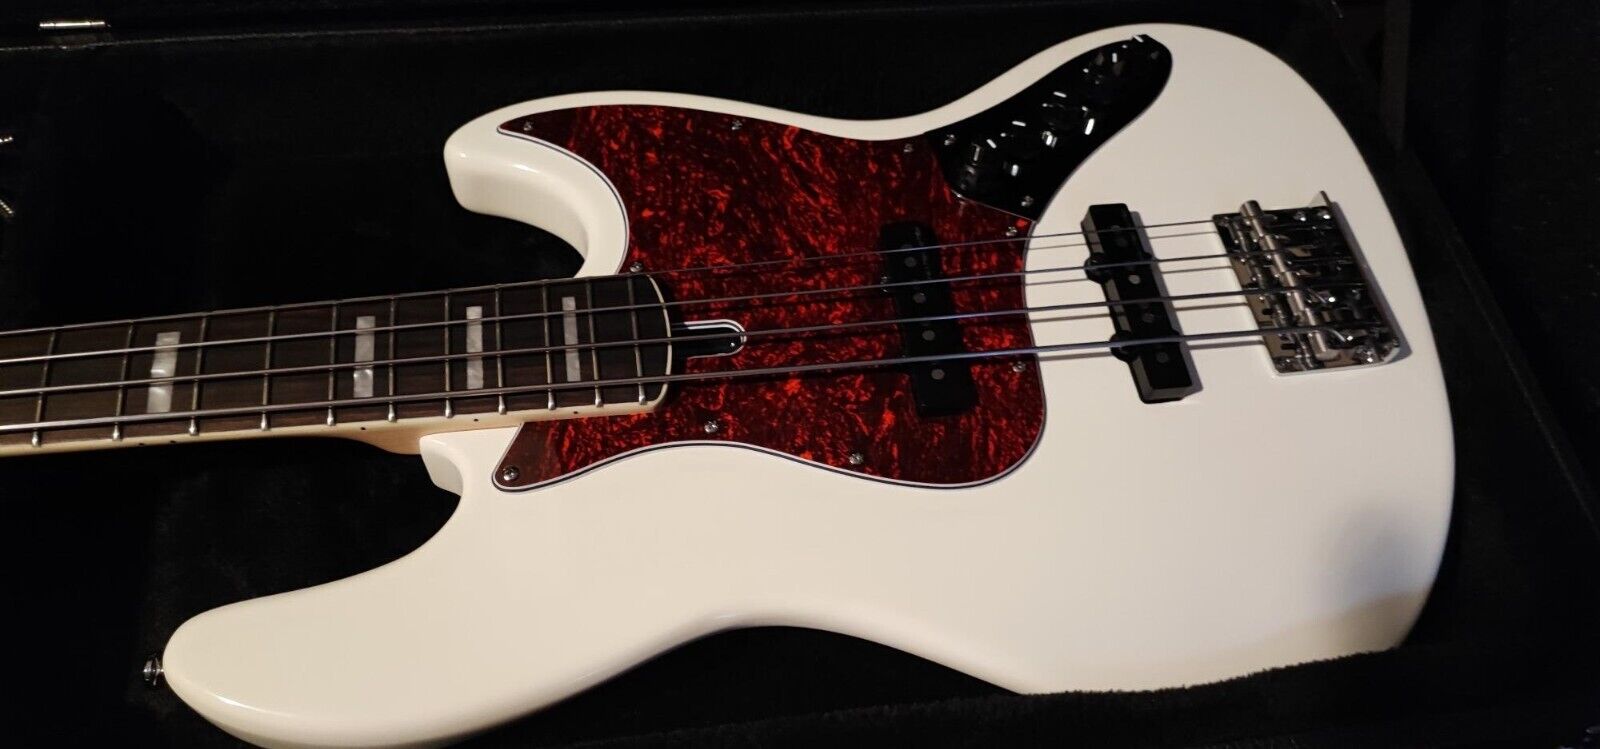 New 2023 Antique White "SIRE MARCUS MILLER V7 ACTIVE" Jazz Bass w/Hardshell Case "SIRE MARCUS MILLER" "SIRE MARCUS MILLER JAZZ BASS - фотография #6